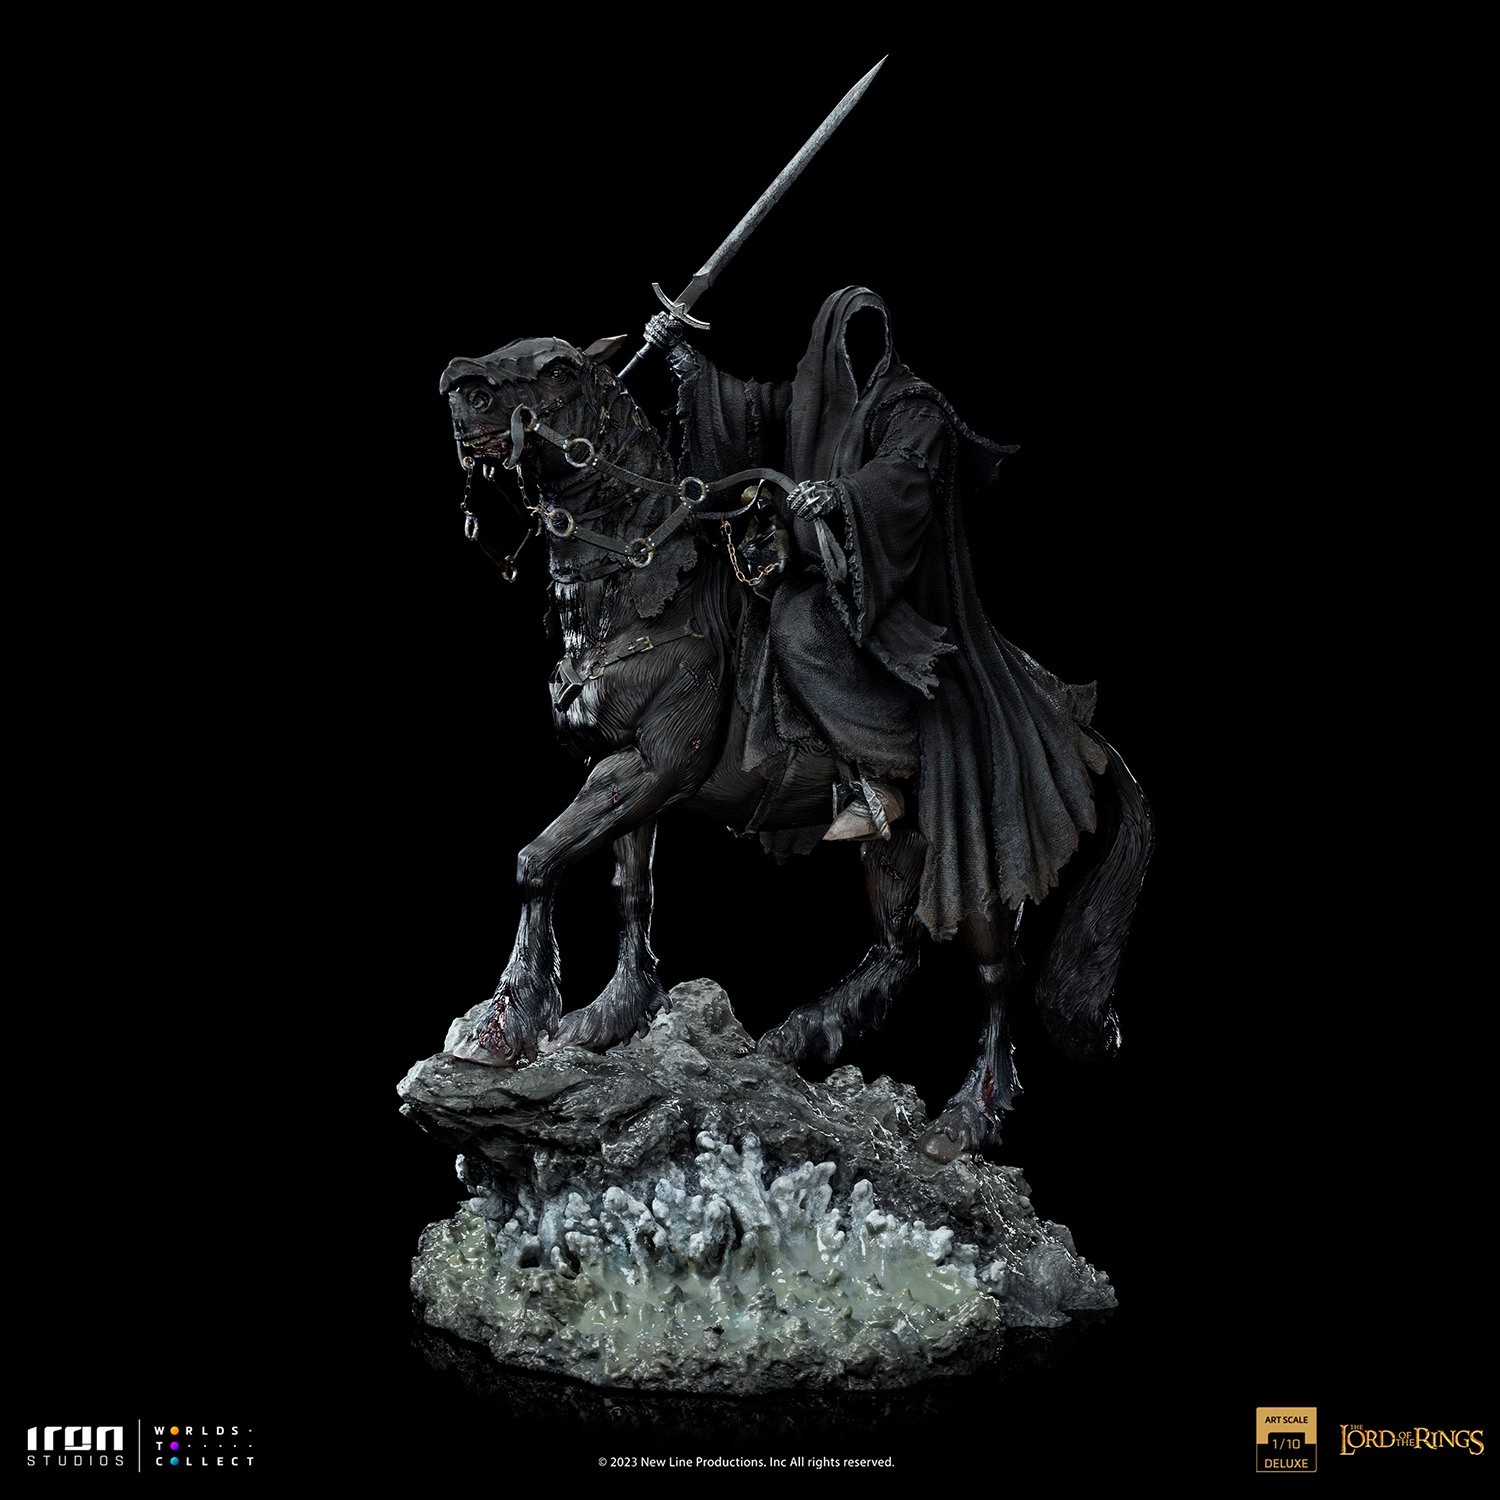 Nazgul on Horse Deluxe